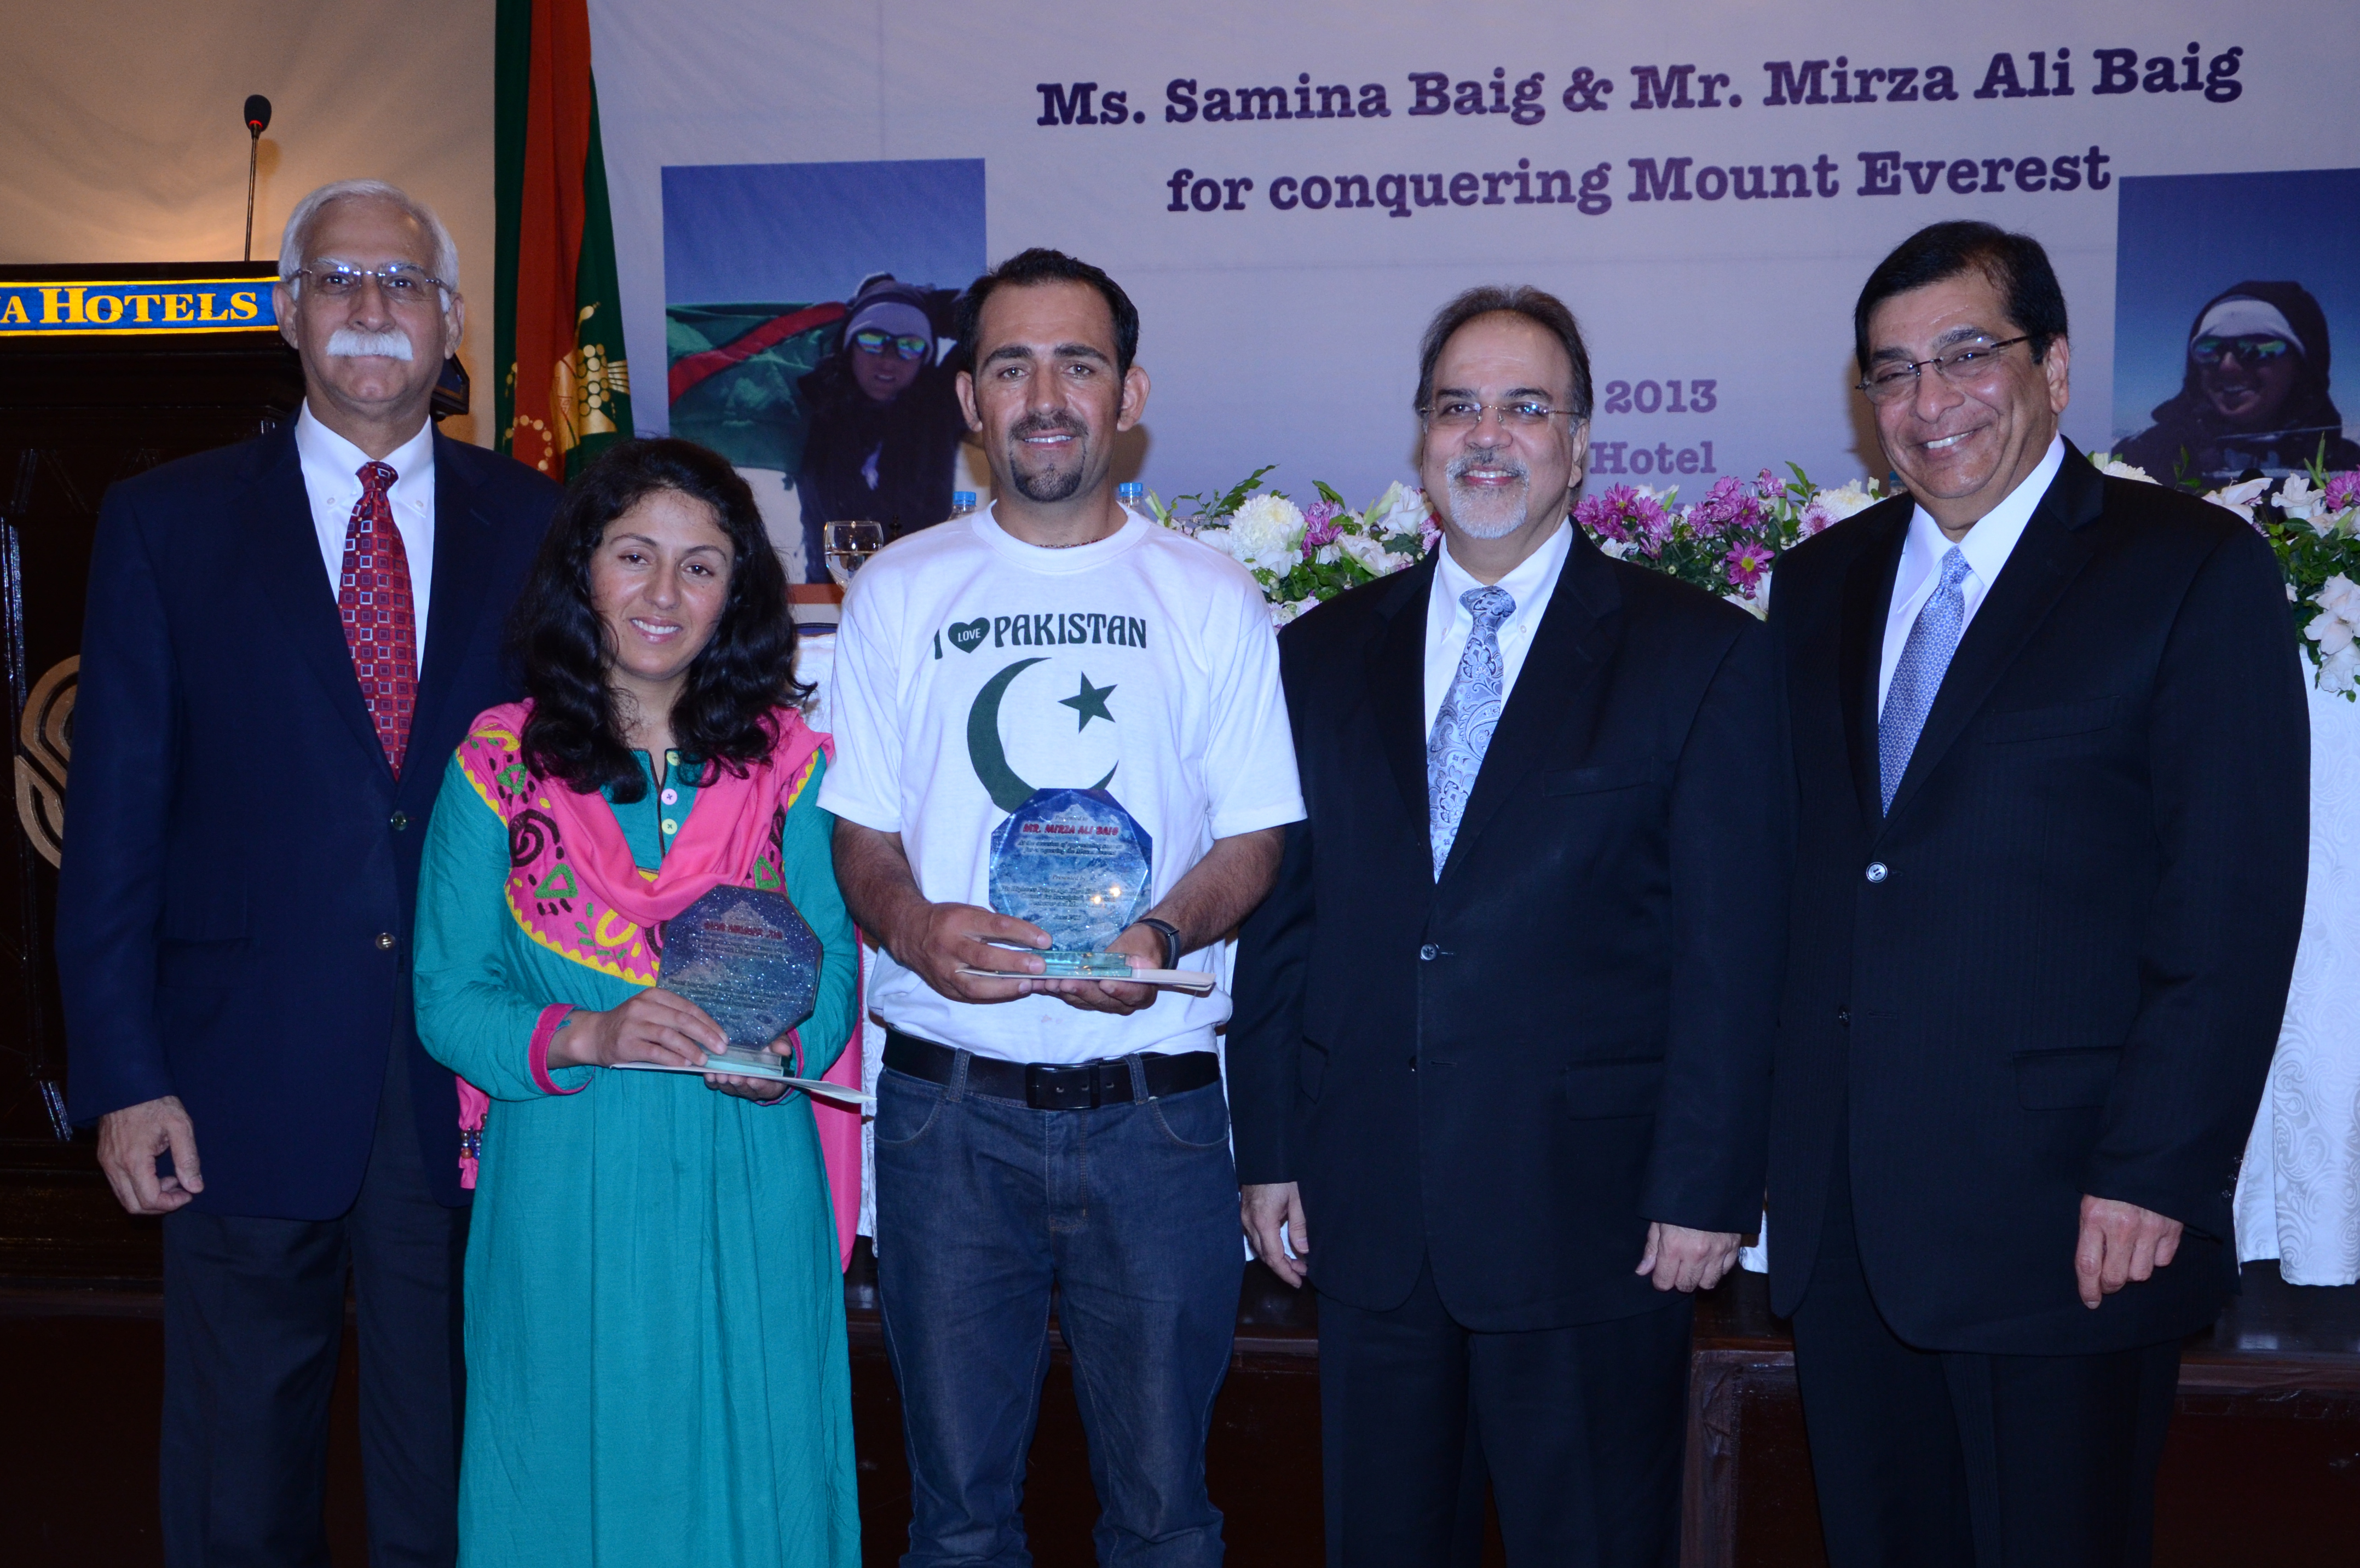 Samina Baig and Mirza Ali were honoured by Jamati and AKDN leaders at a reception held upon their return to Pakistan. Photo: Courtesy of the Ismaili Council for Pakistan